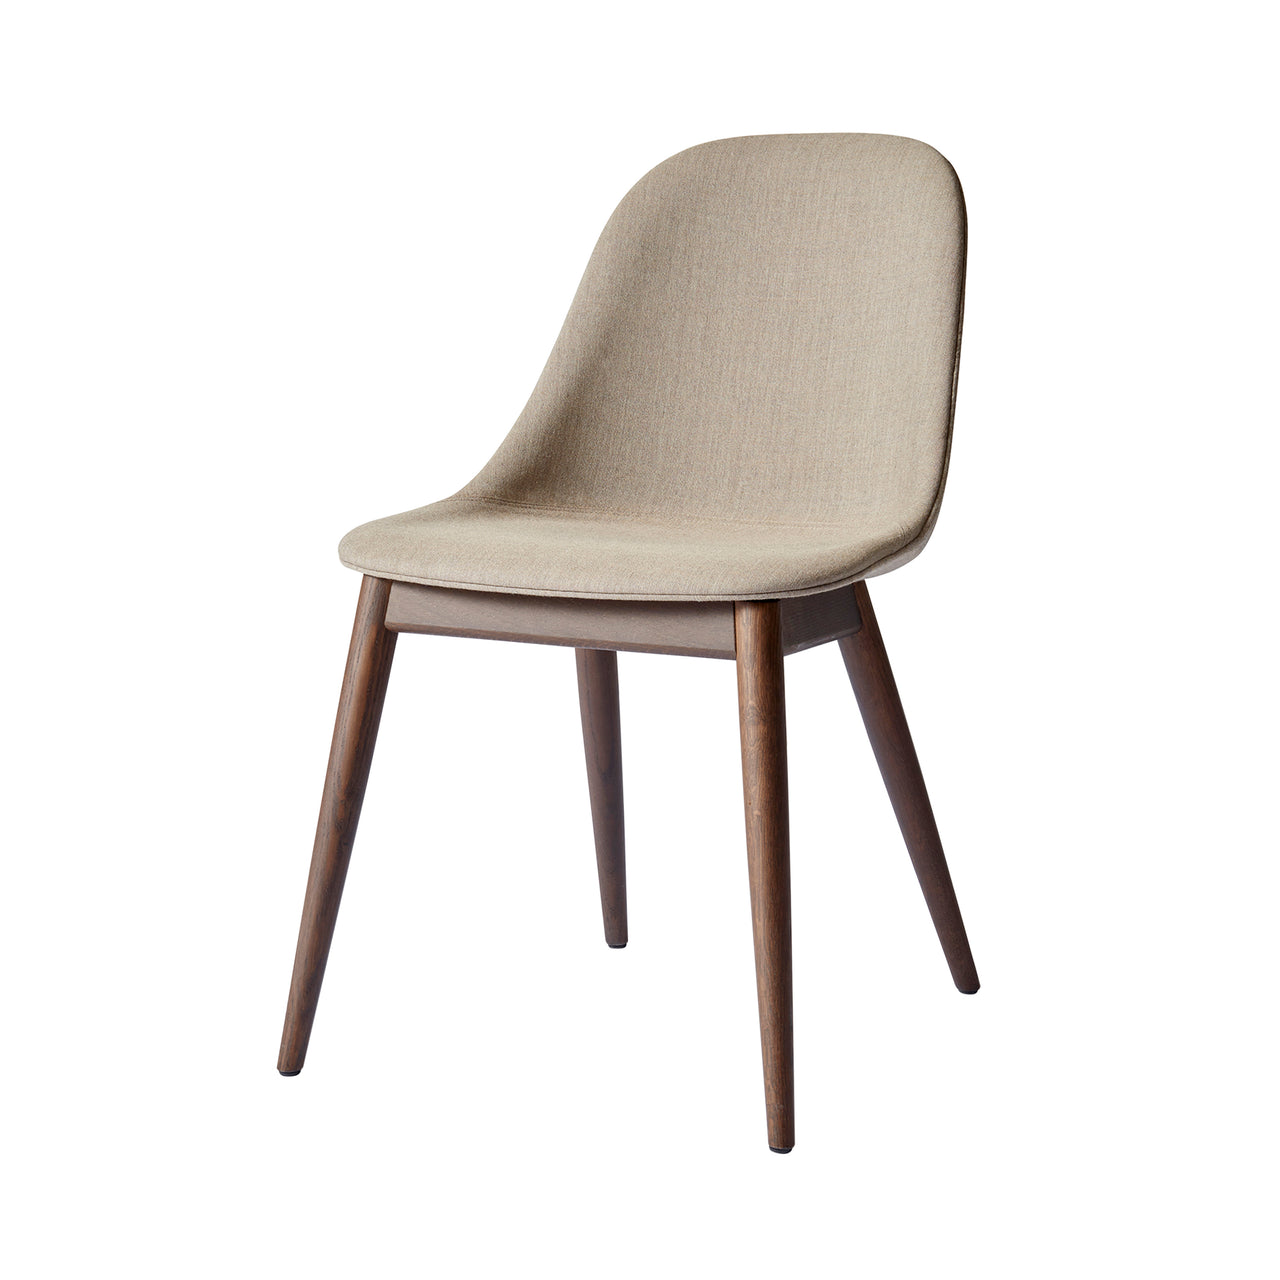 Harbour Side Chair: Wood Base Upholstered + Dark Stained Oak + Remix3 233